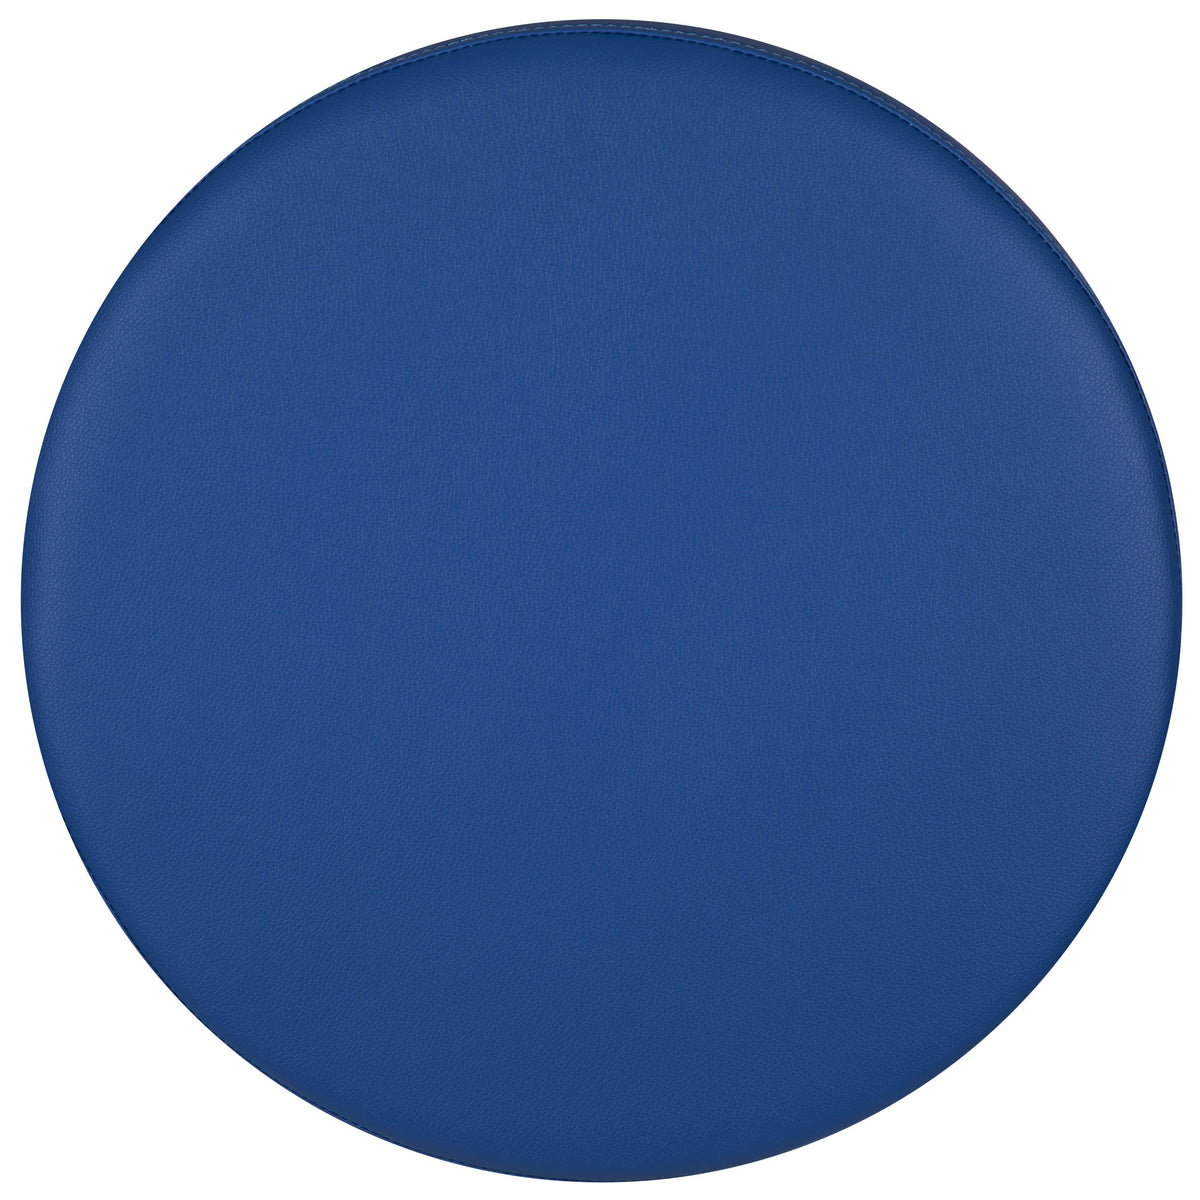 Blue |#| 18inchH Soft Seating Flexible Circle for Classrooms and Common Spaces - Blue